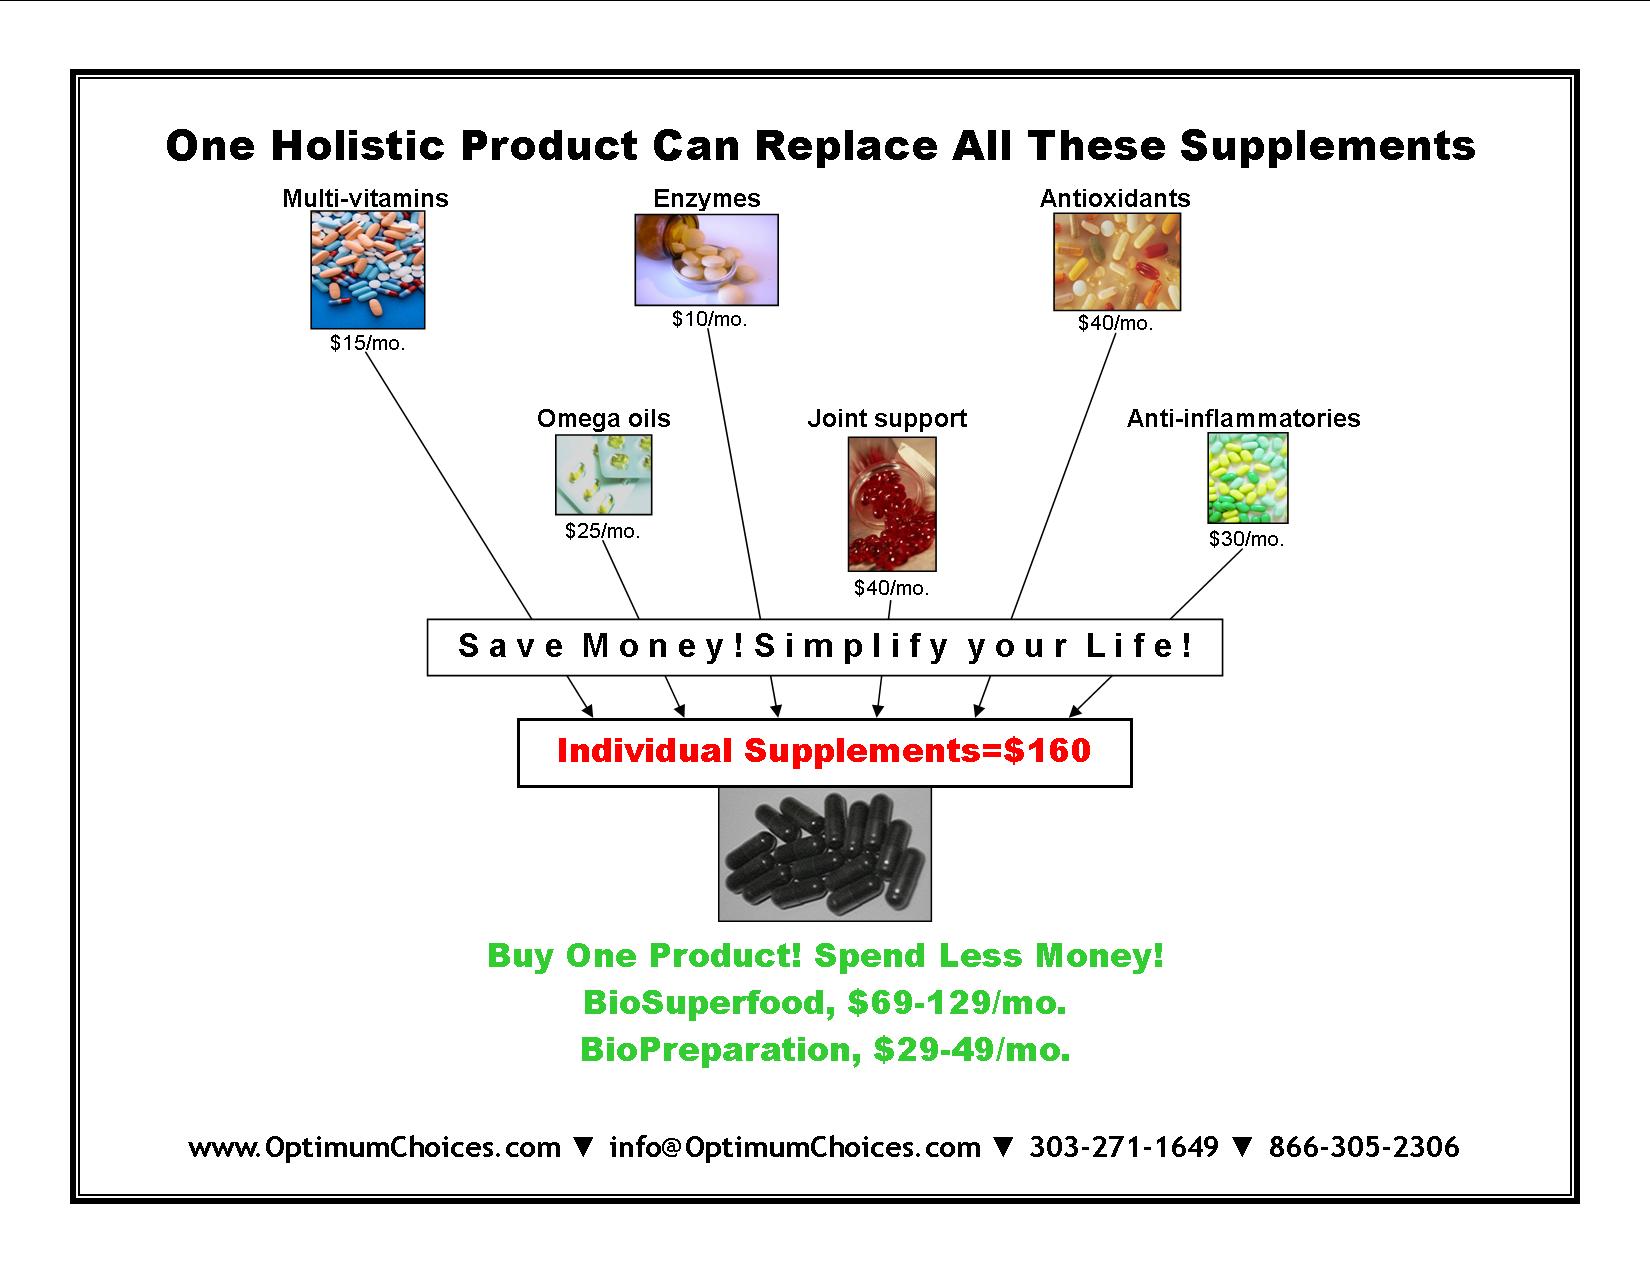 Save money buying fewer supplements